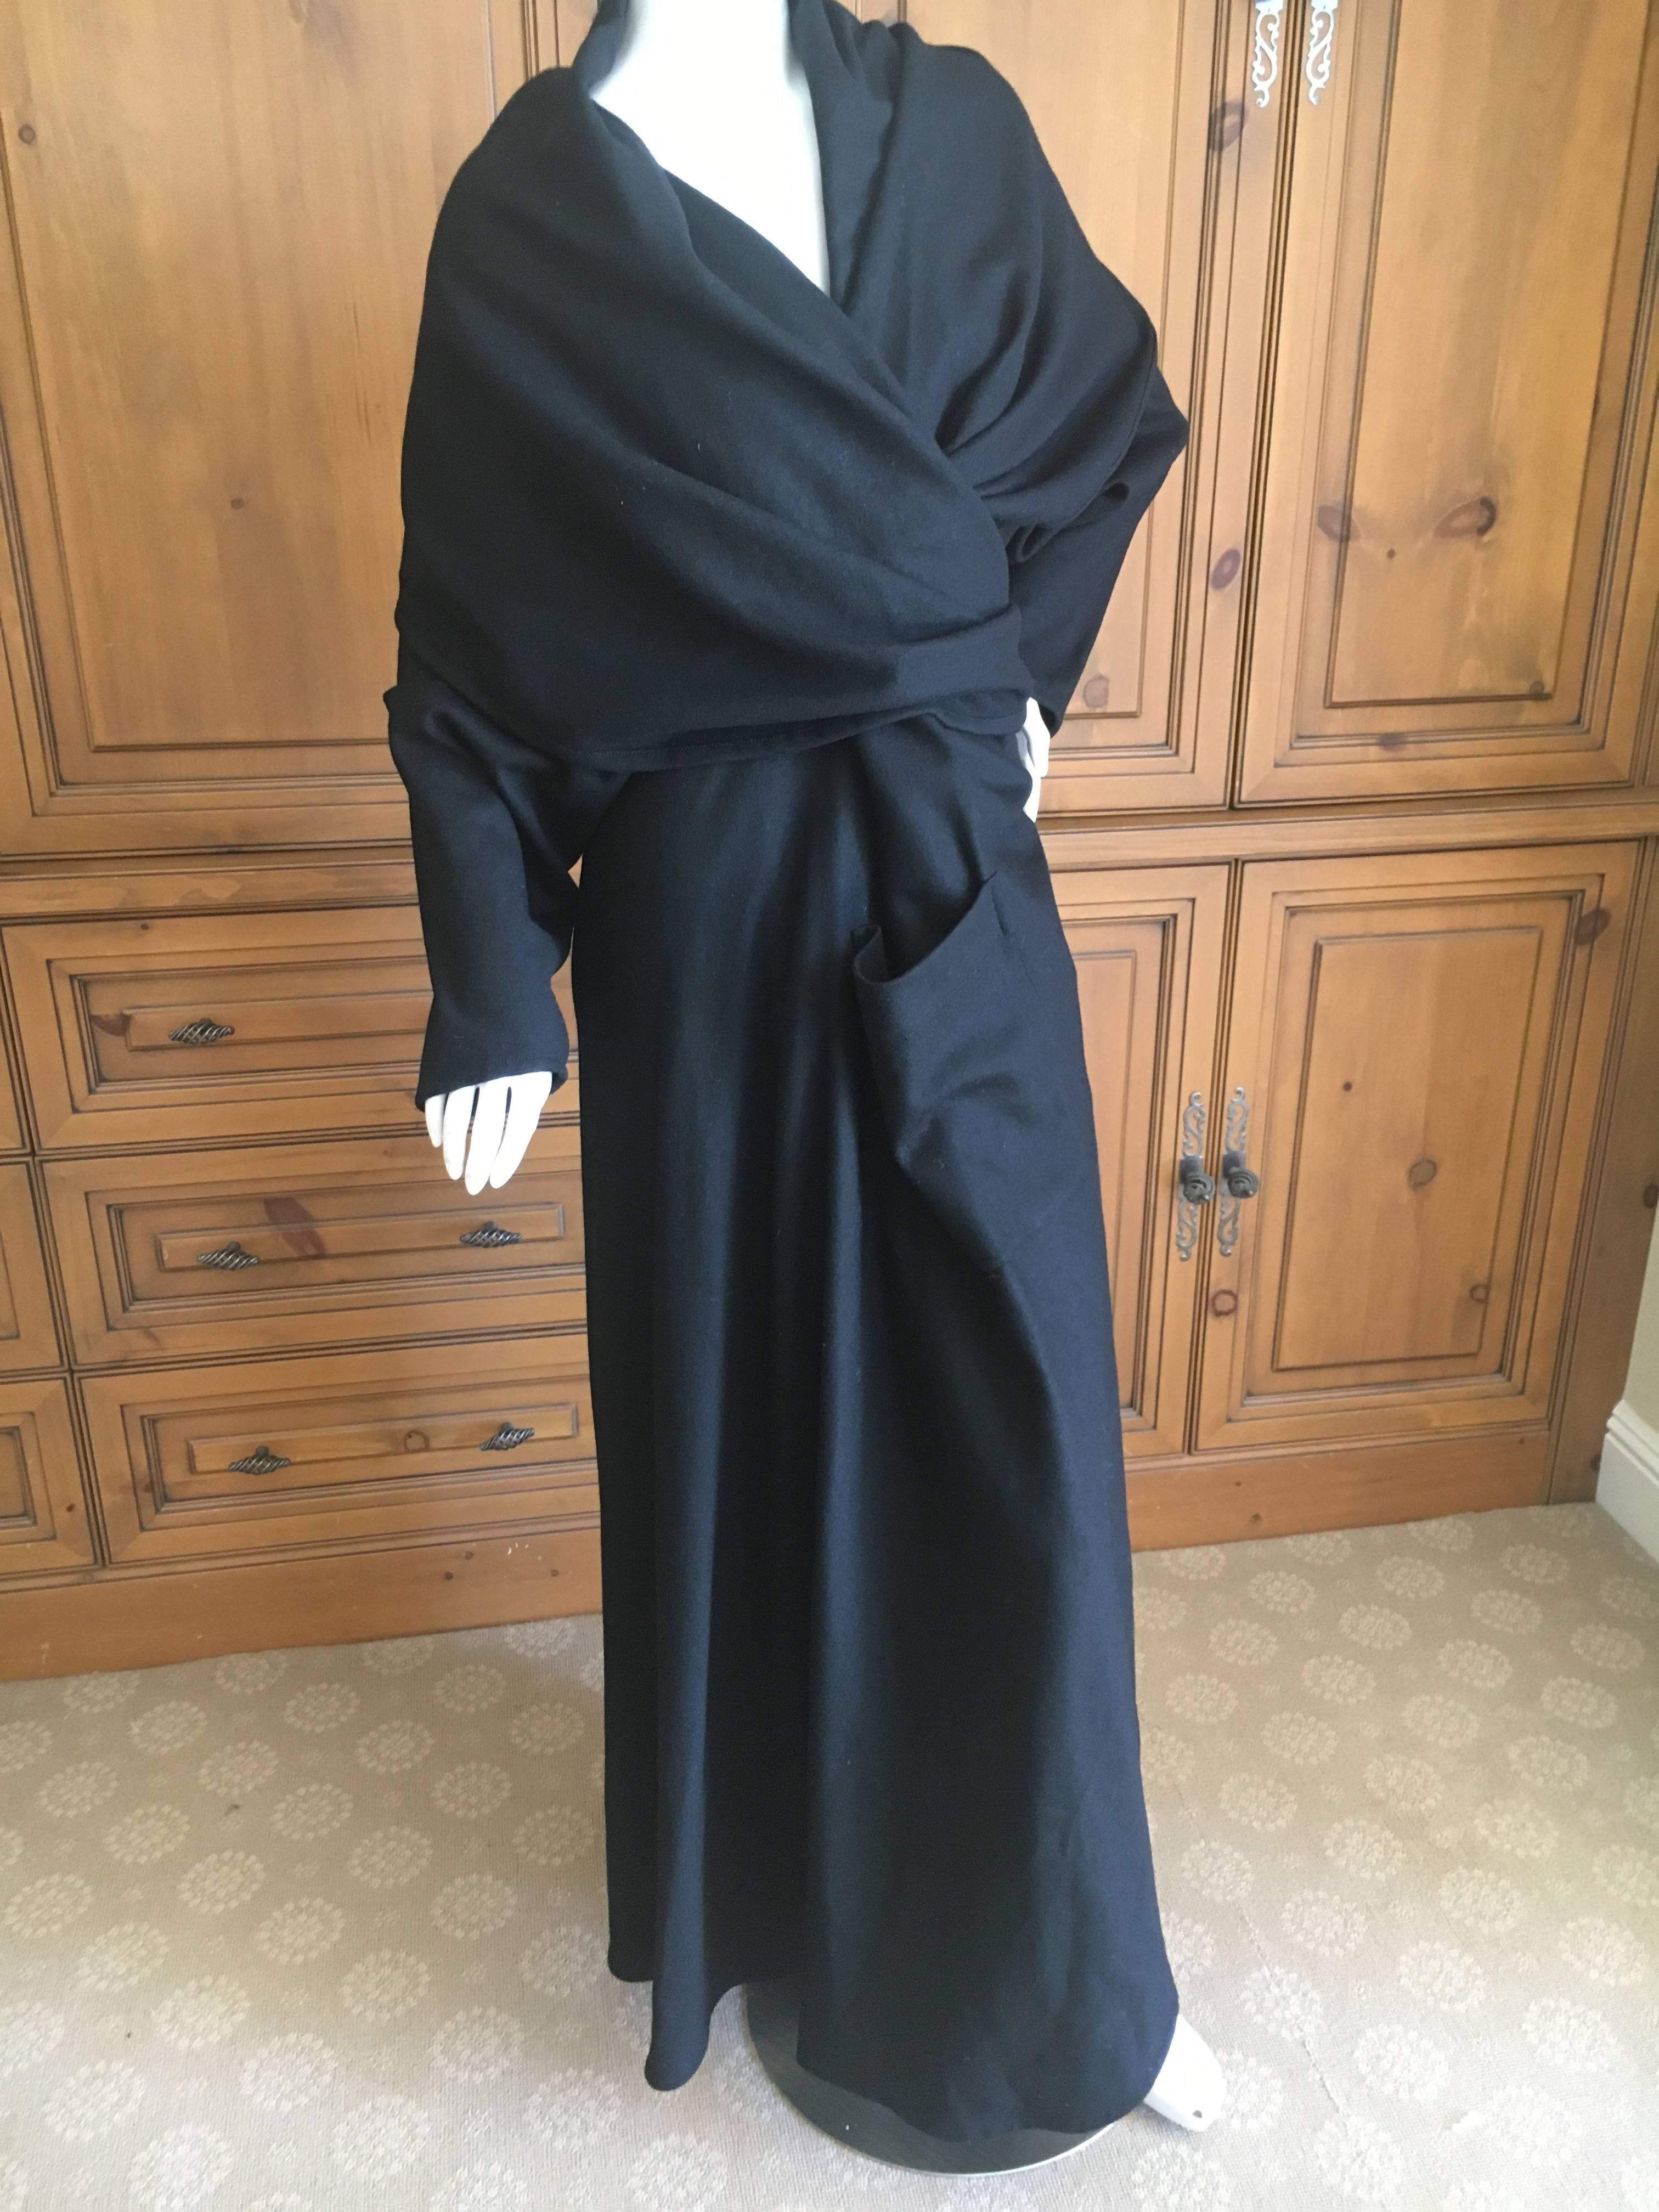 Issey Miyake for Ultimo 1980's Voluminous Black Coat with Wide Collar / Cape In Excellent Condition For Sale In Cloverdale, CA